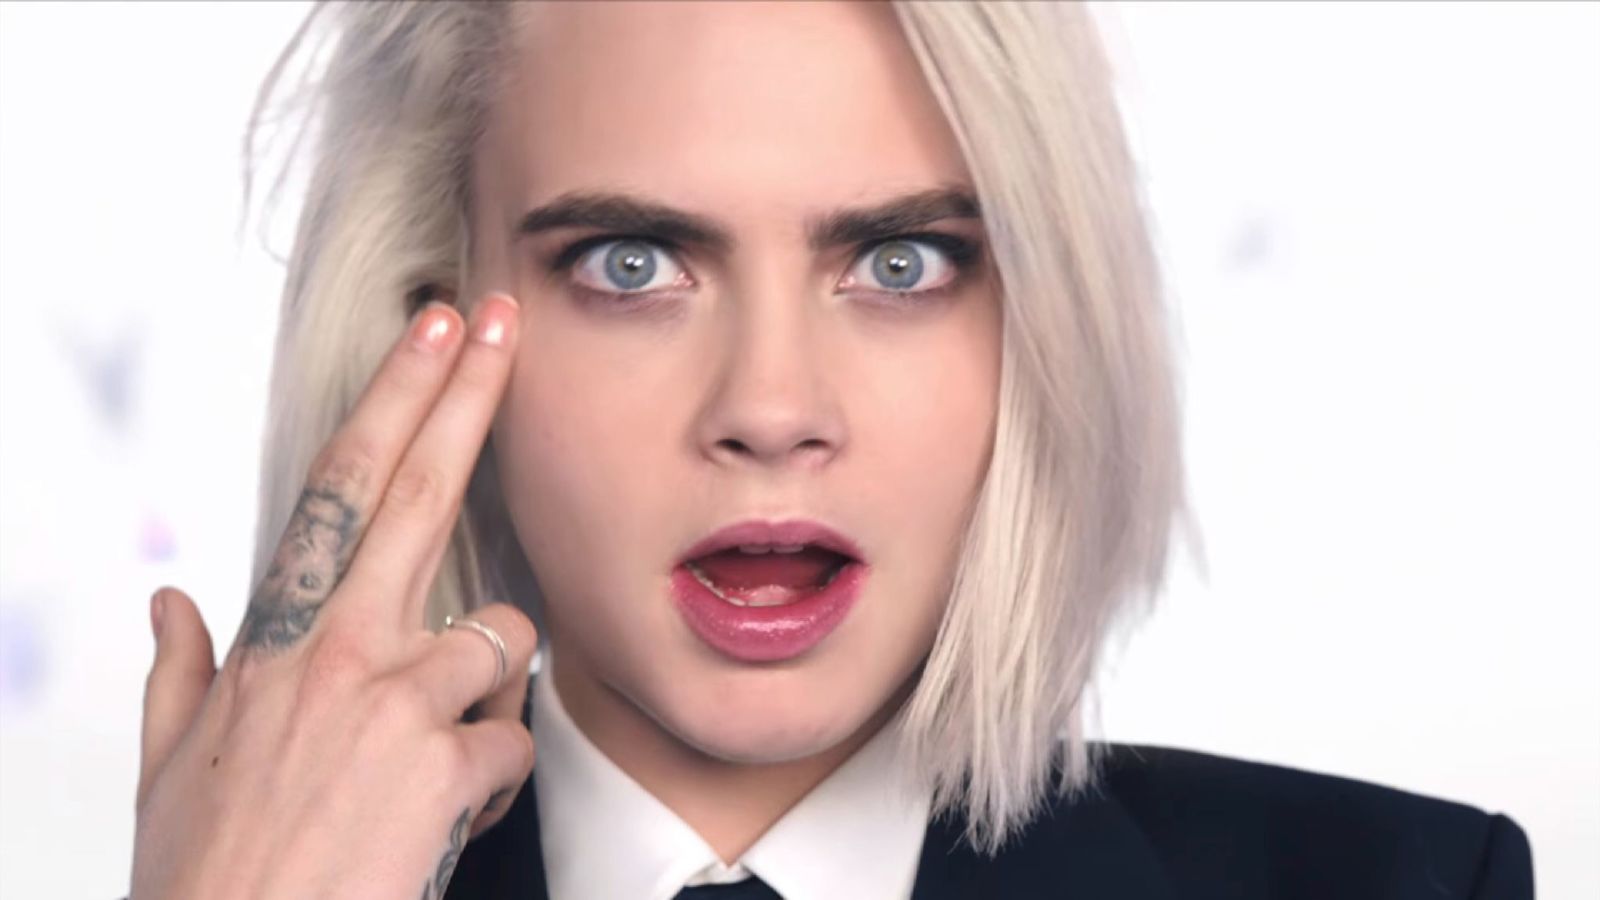 It's all pop 2 me: Cara Delevingne - I Feel Everything, video premiere